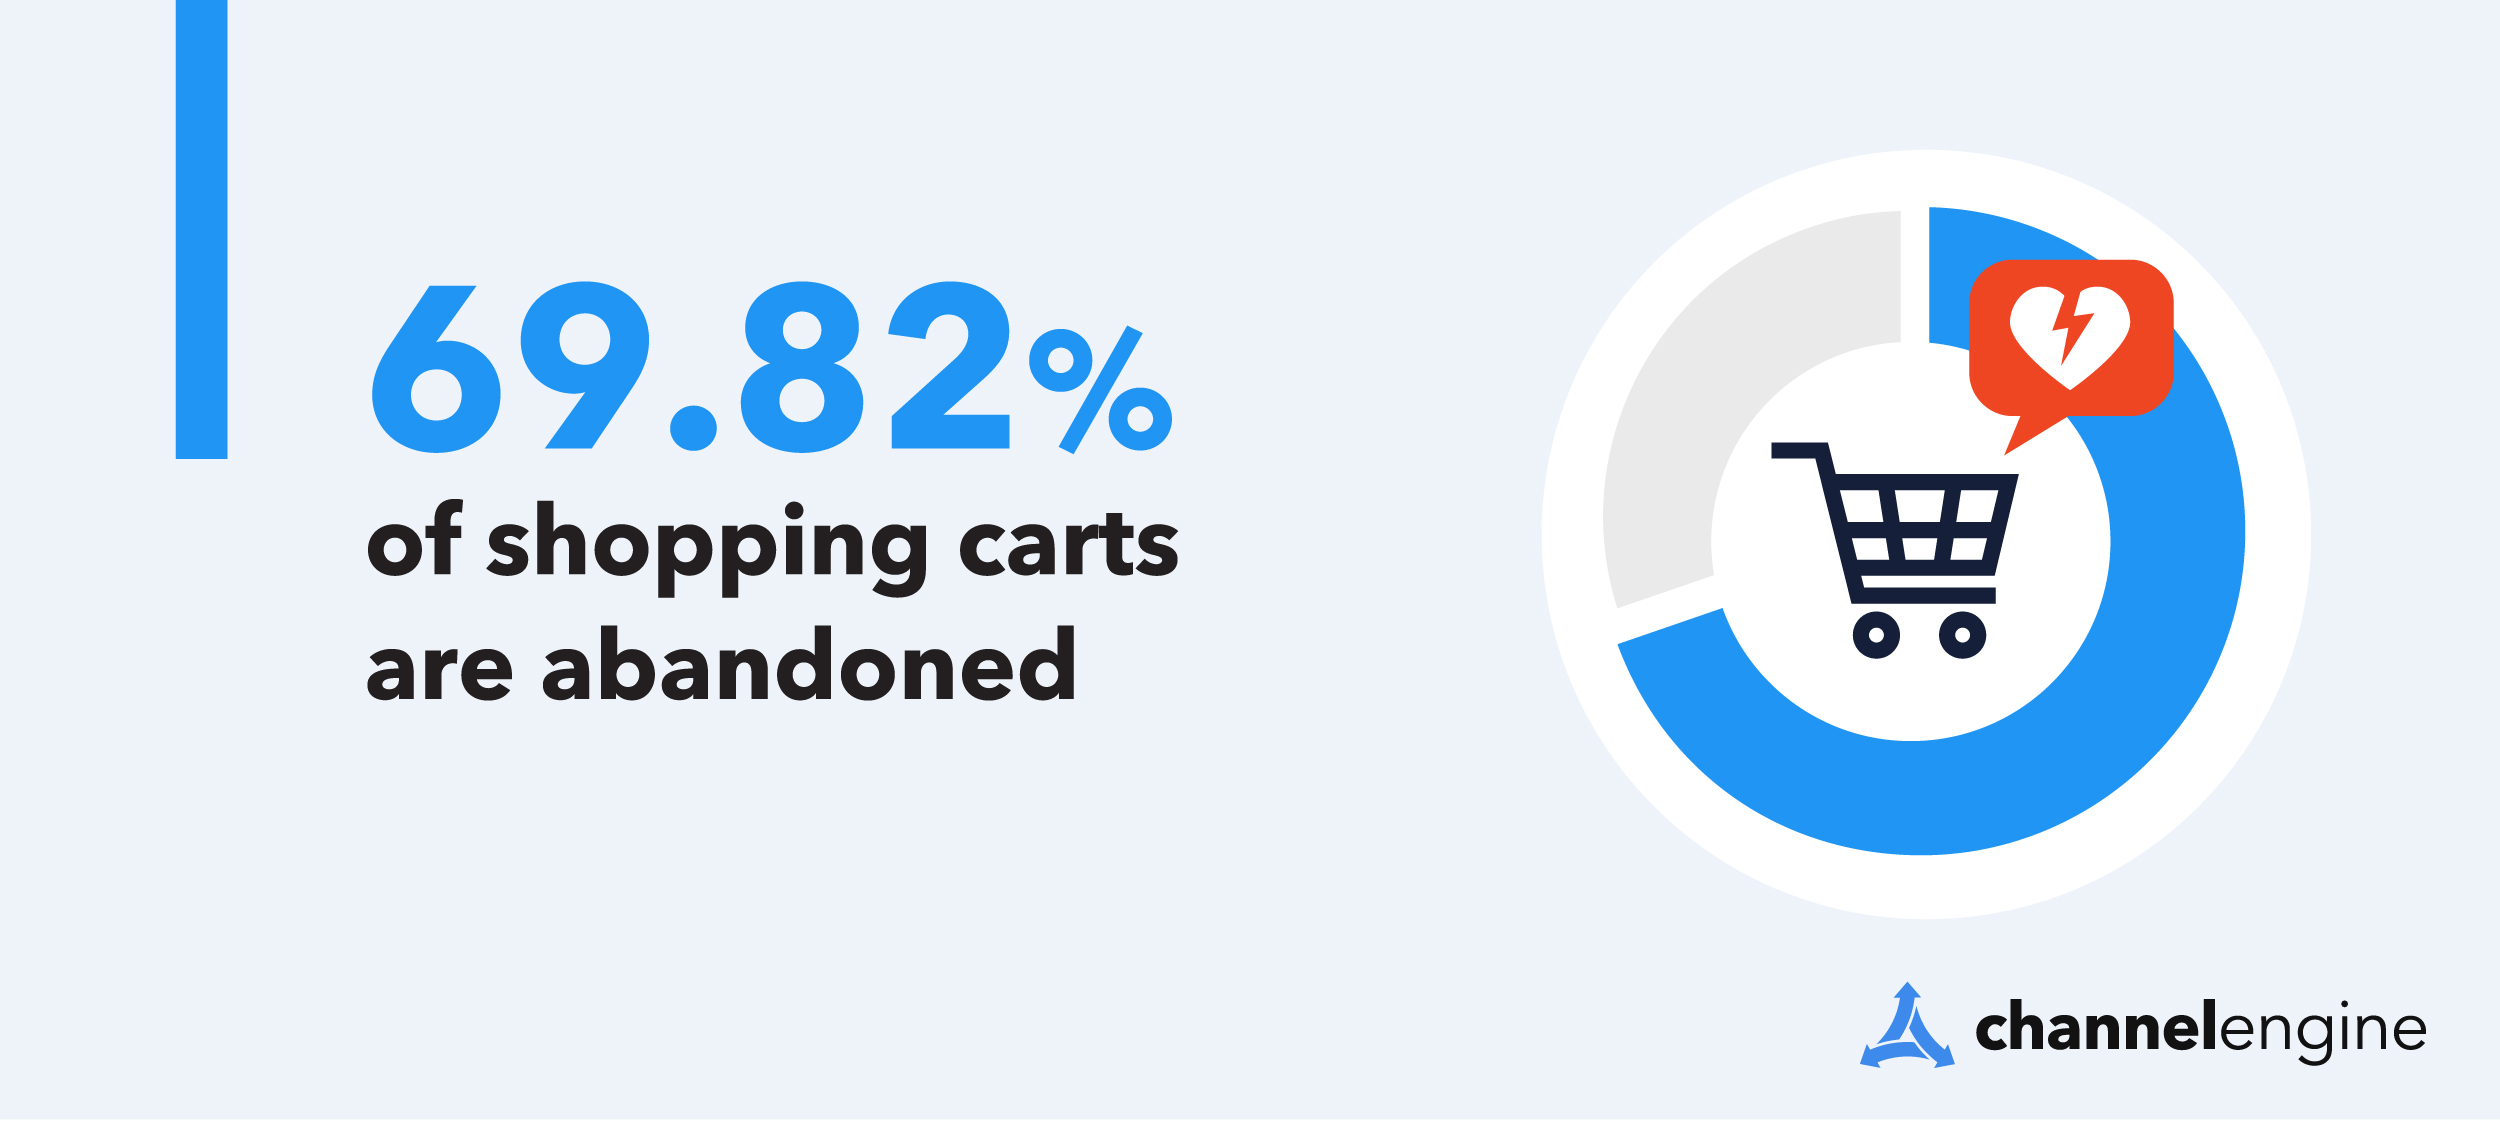 The impact of UX: Just by optimizing checkout processes $260 billion USD of lost sales can be reclaimed